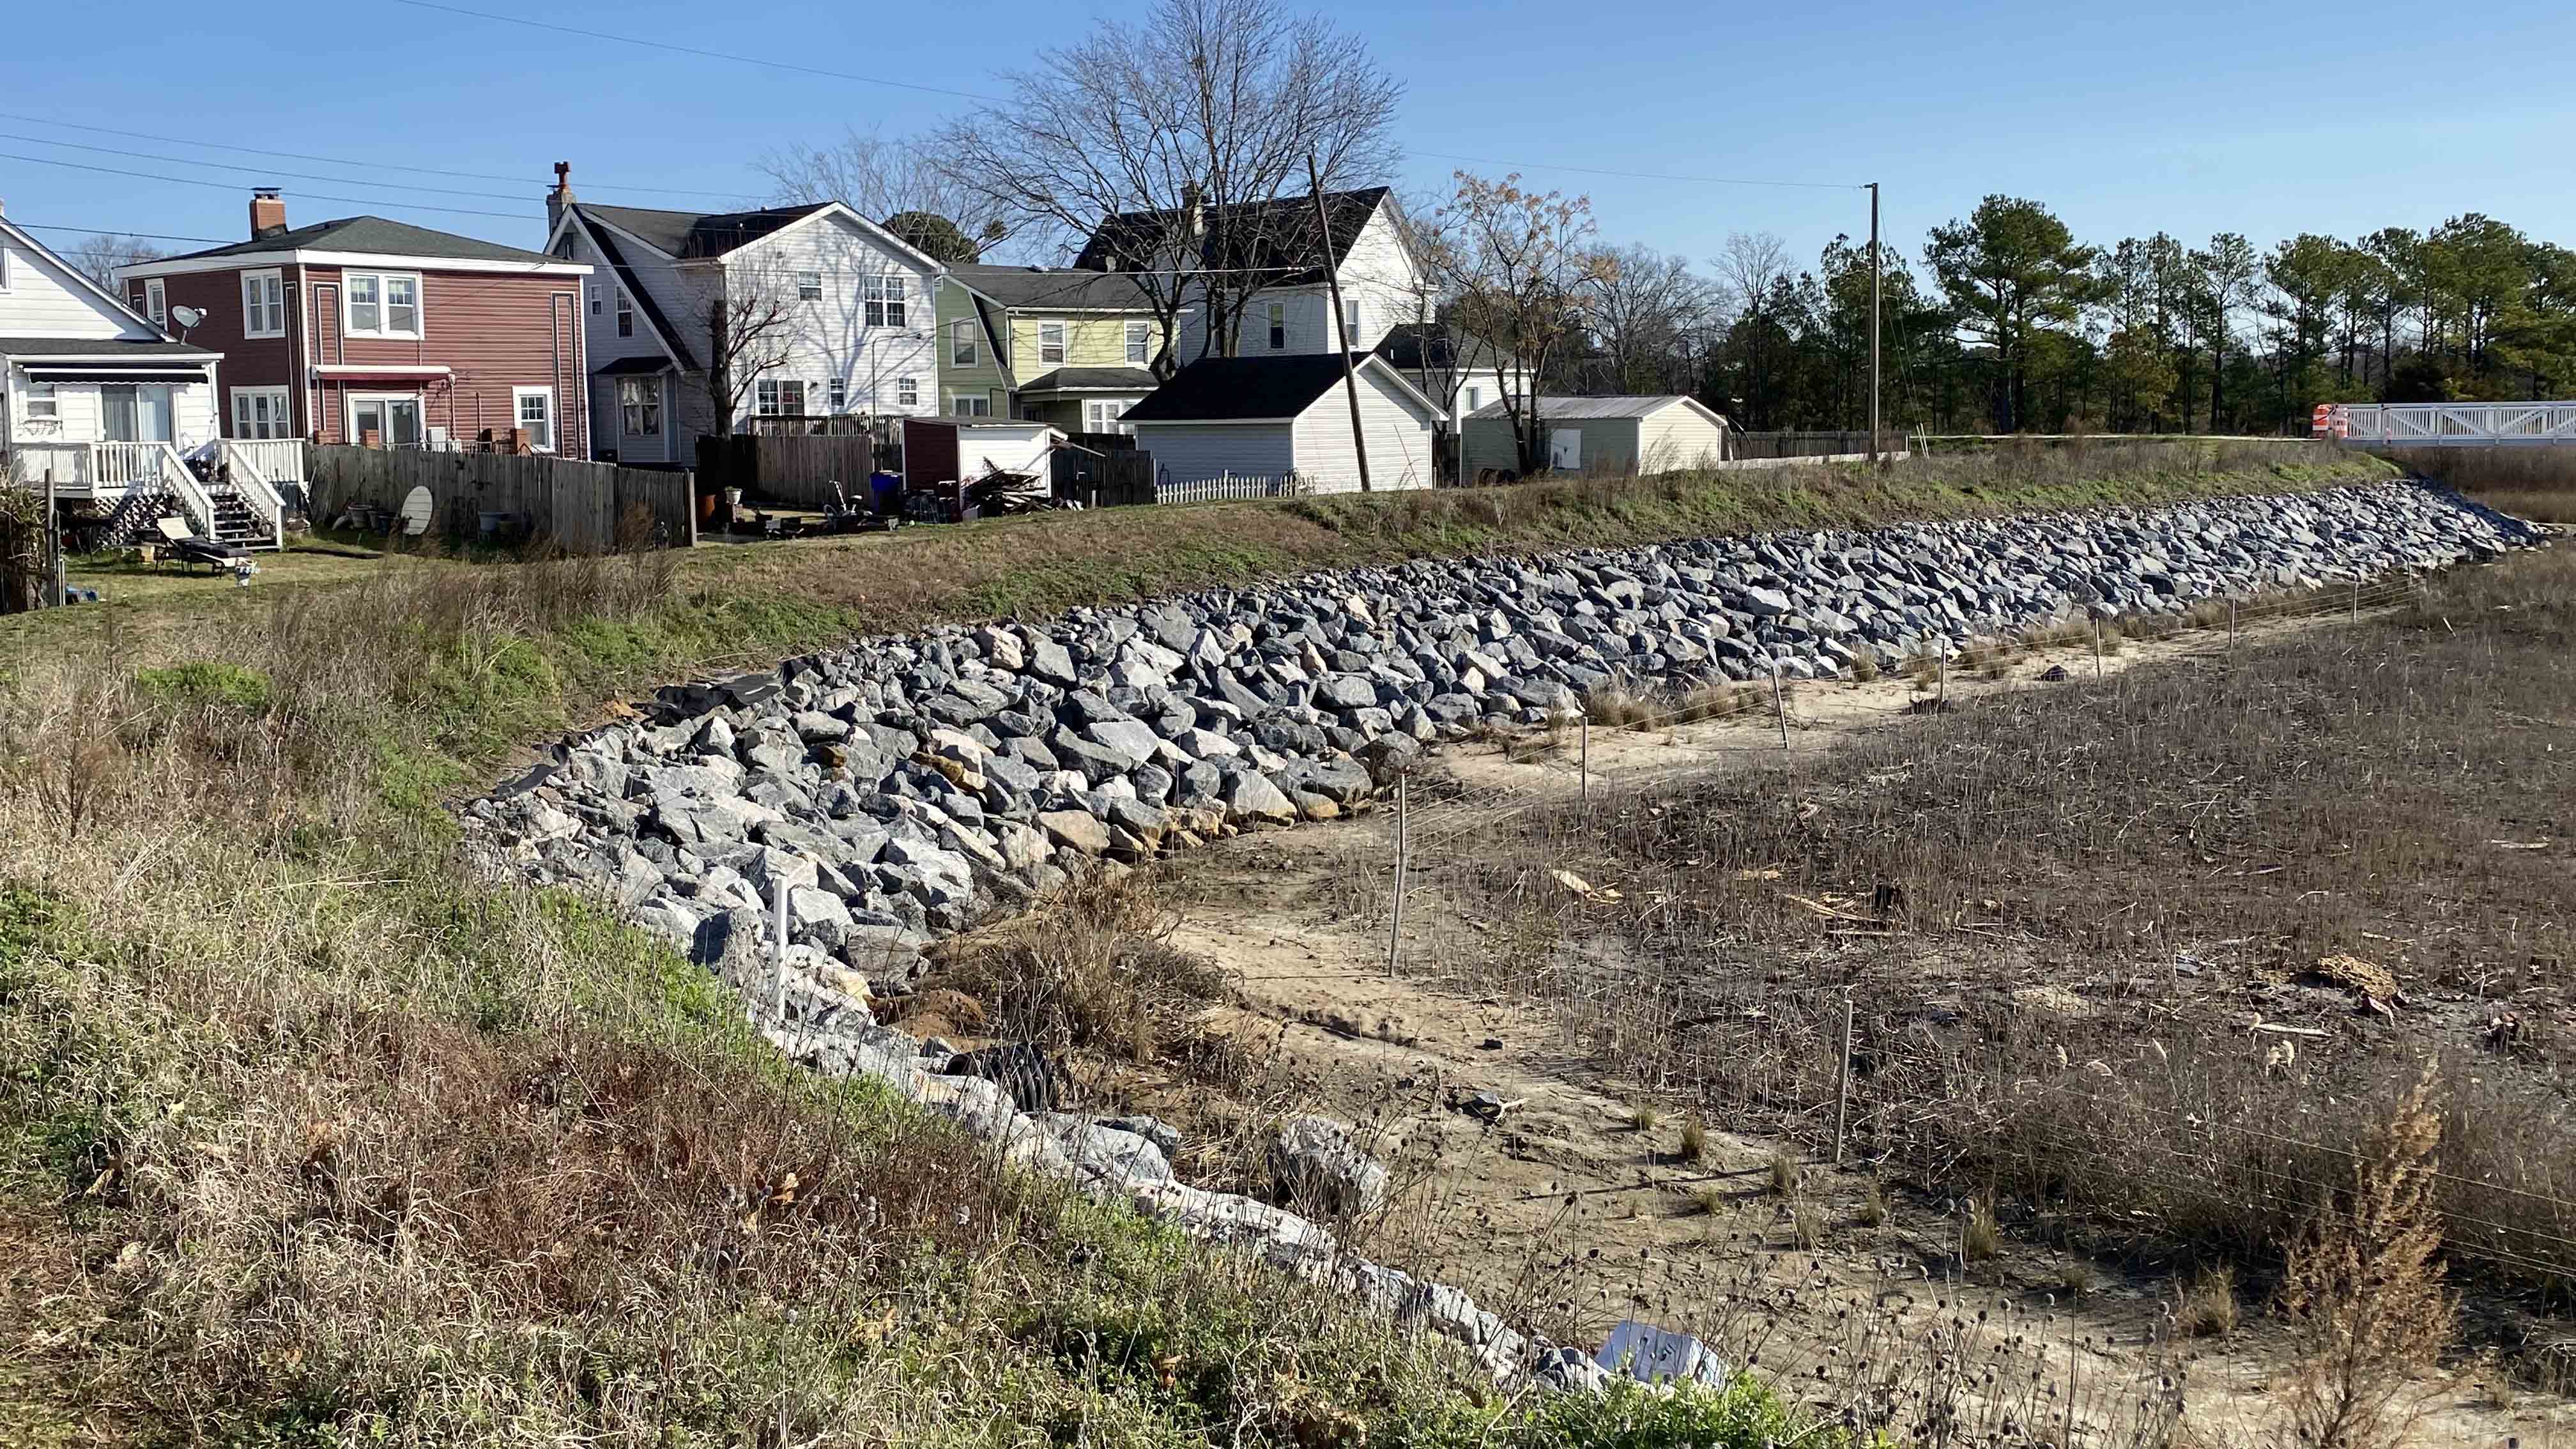 Part of the Ohio Creek Watershed Project in Norfolk, which is discussed in the new UVA podcast. (Image: Katherine Hafner)